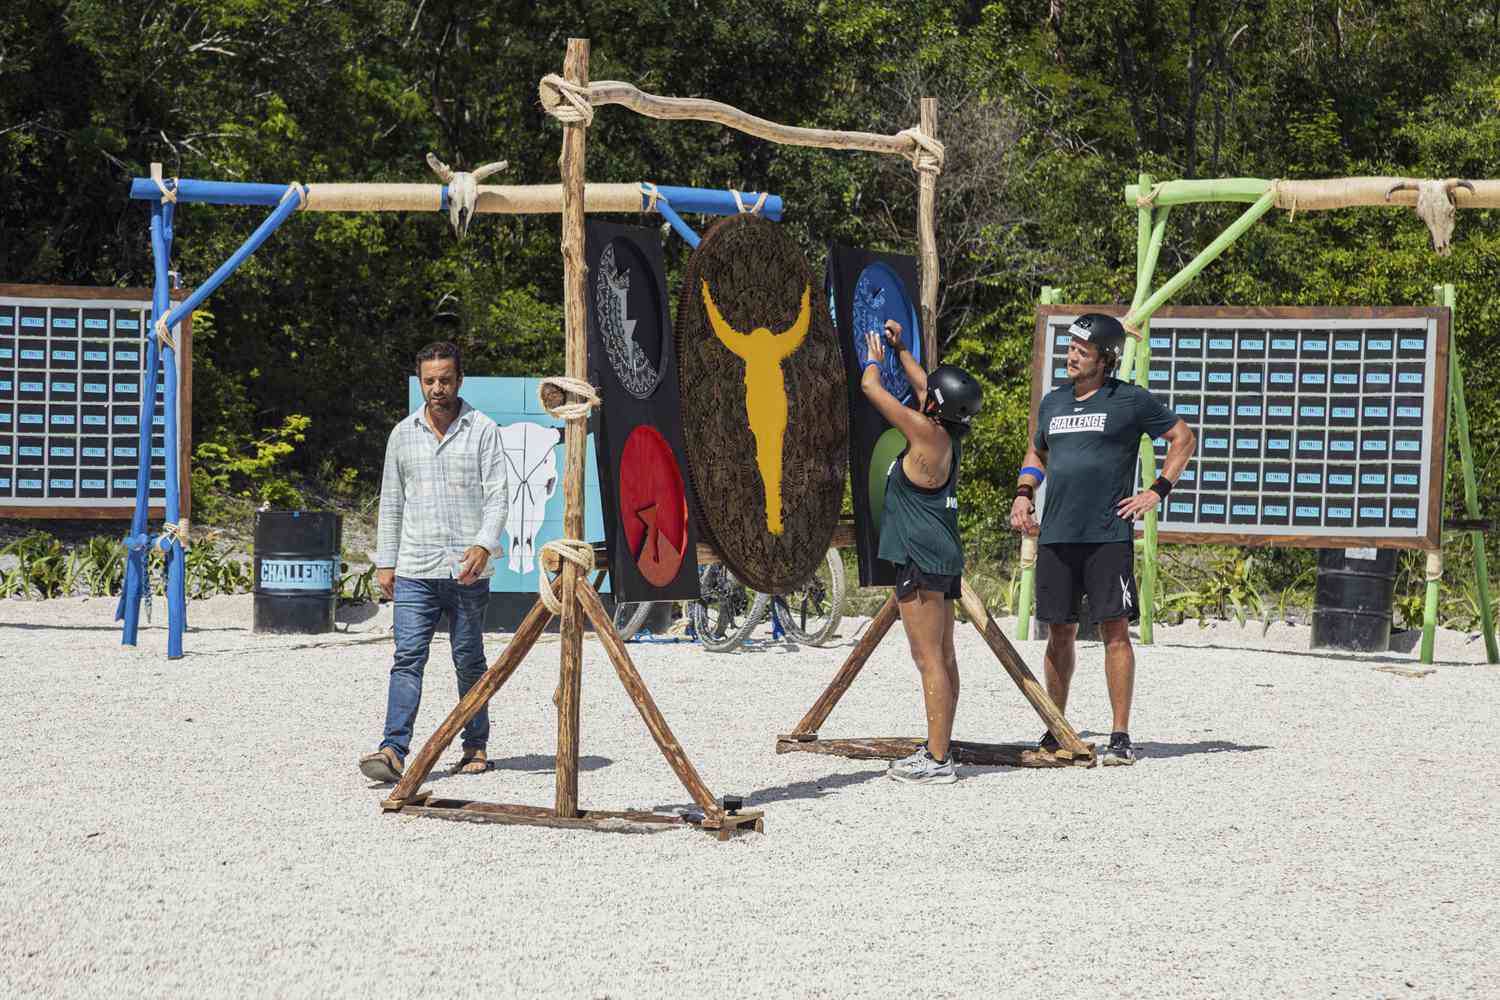 THE CHALLENGE: ALL STARS